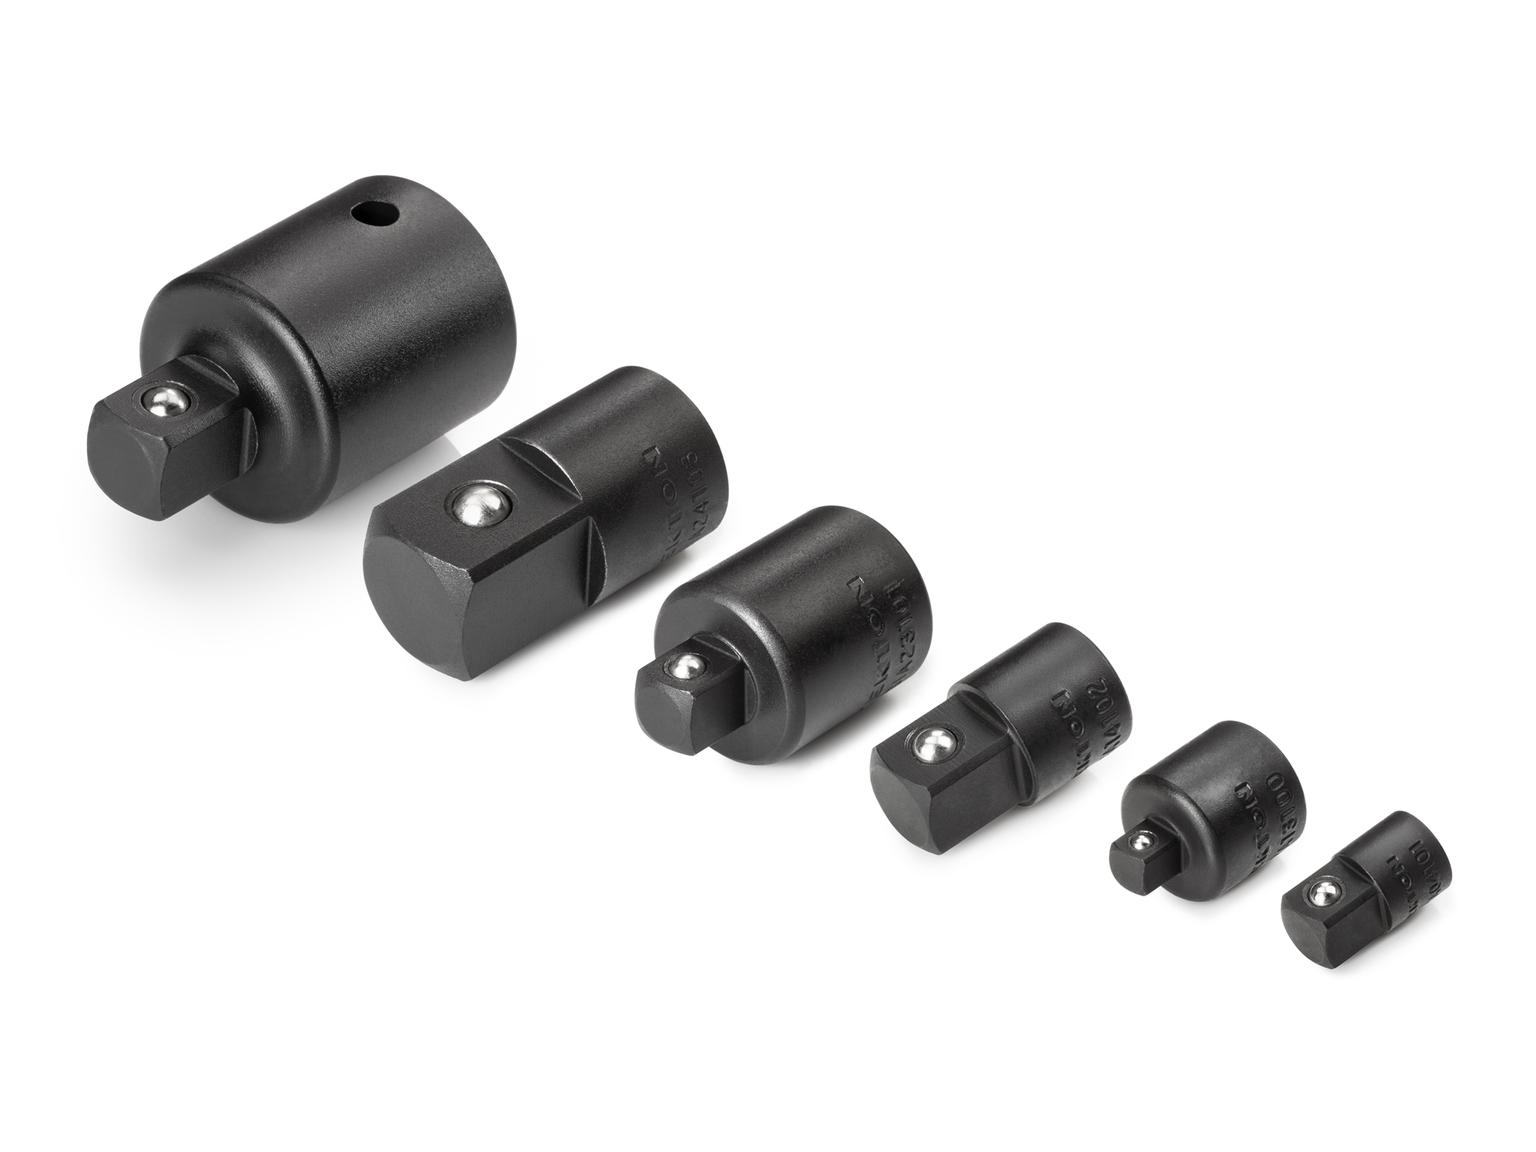 Impact Adapter/Reducer Set, 6-Piece (1/4, 3/8, 1/2, 3/4 Inch Drive)